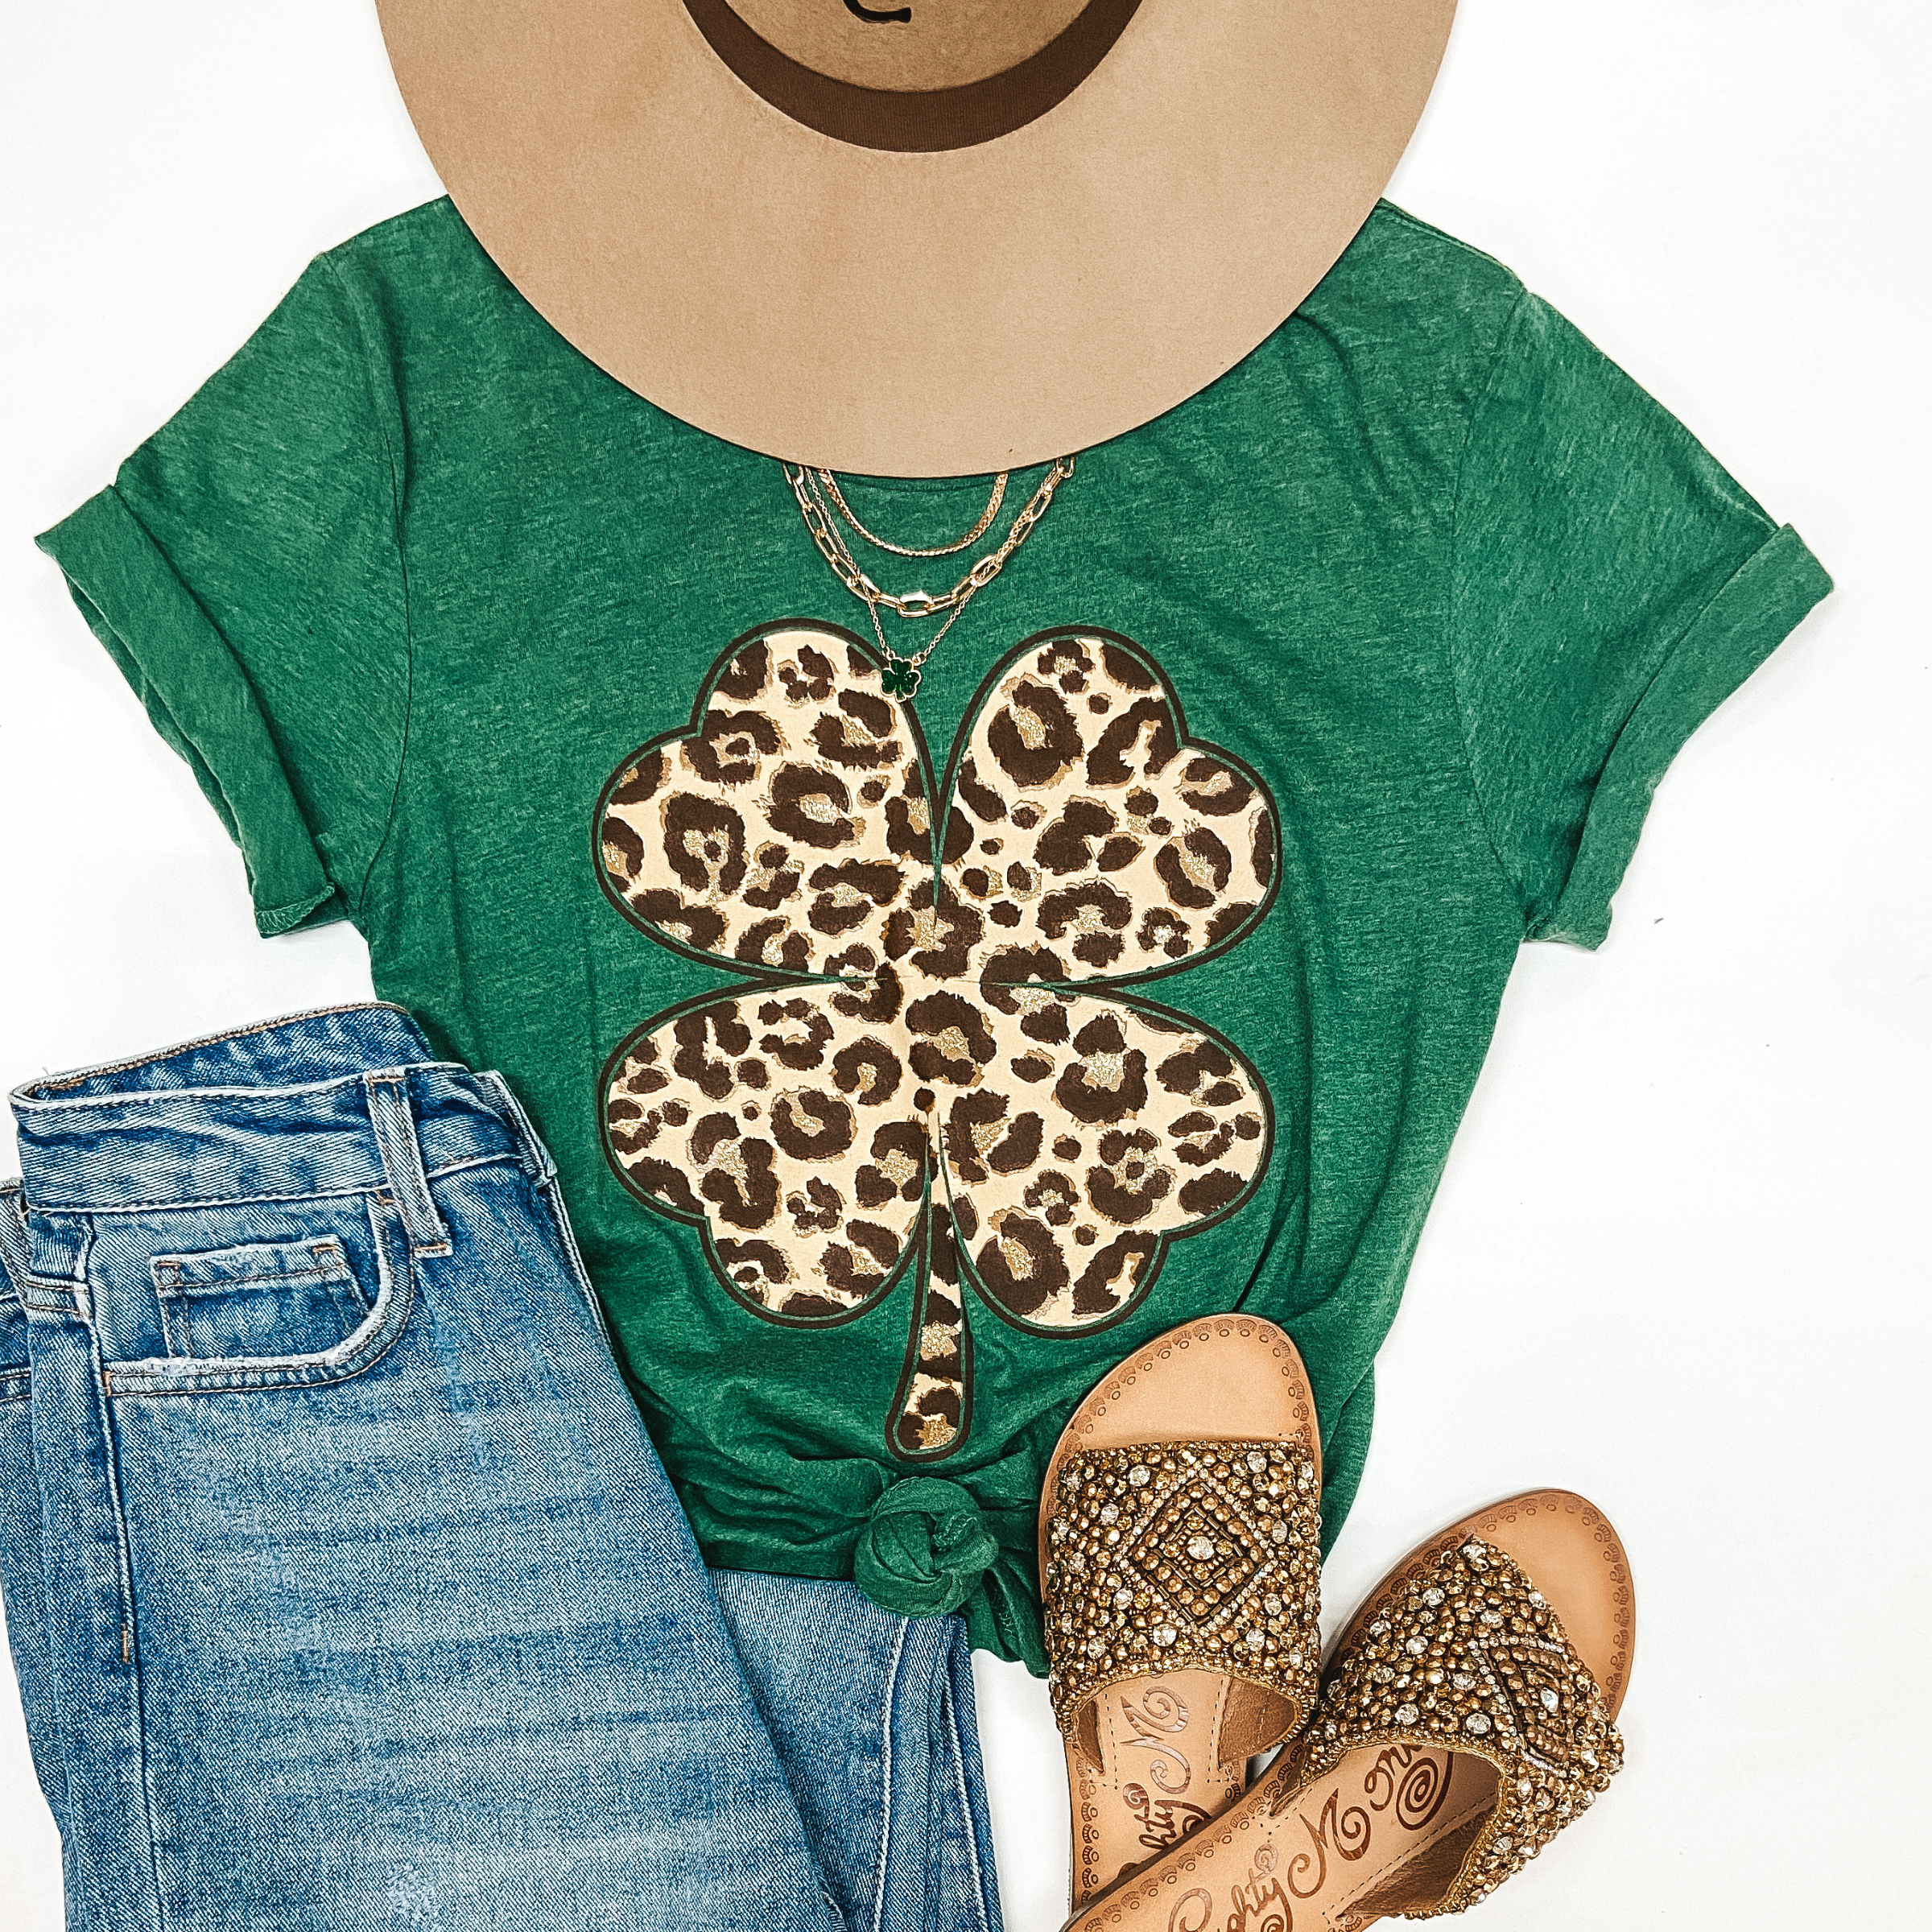 A green tee shirt with a leopard print clover. Pictured with light wash jeans, a tan hat, and gold sandals.